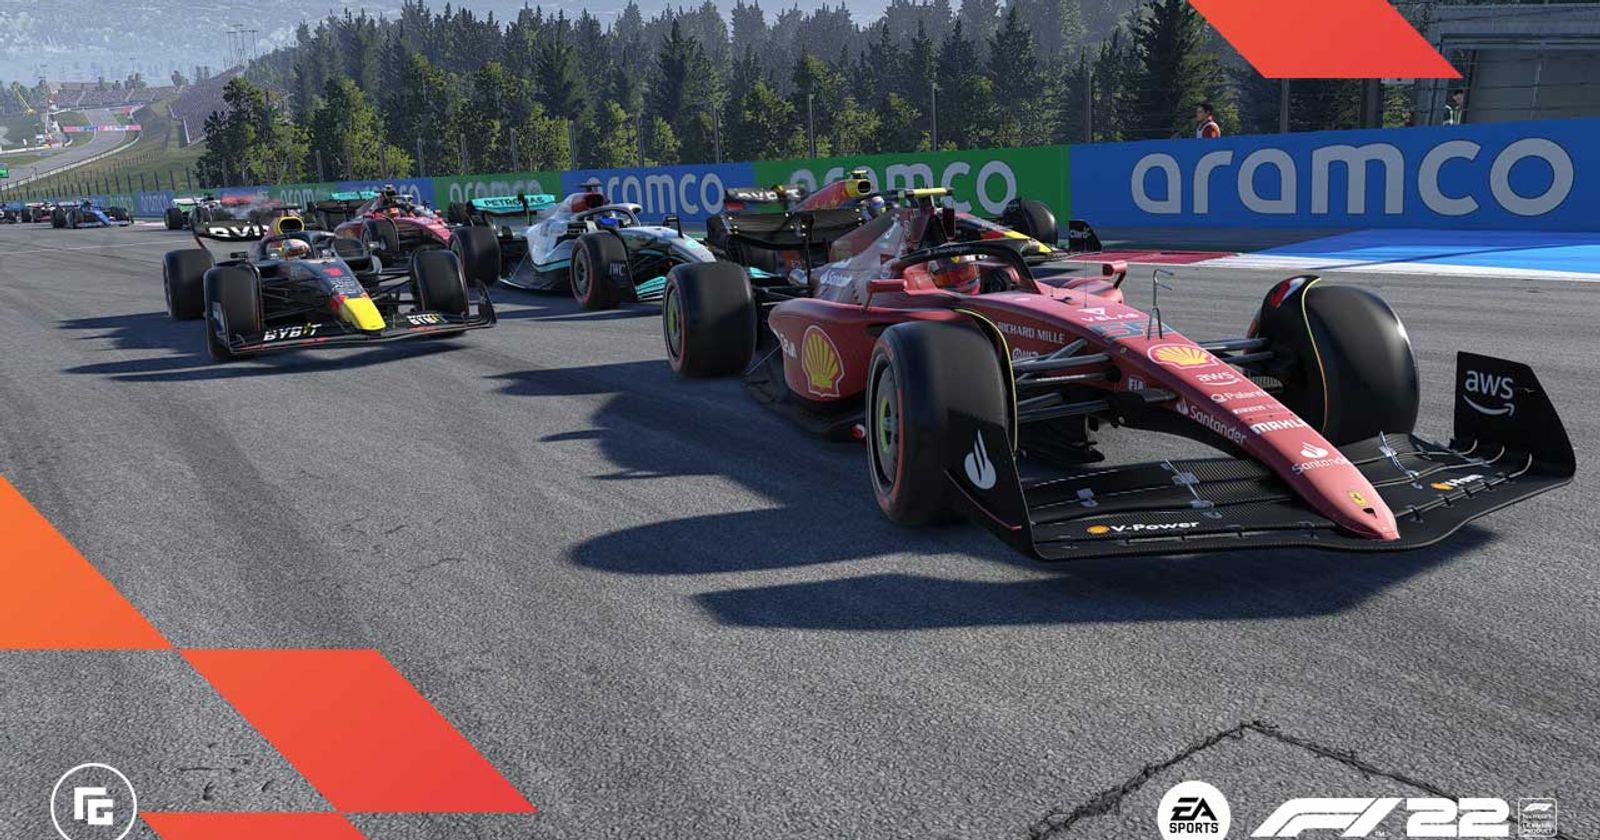 F1 22 Update 1.06 Deployed for Various Fixes This July 25